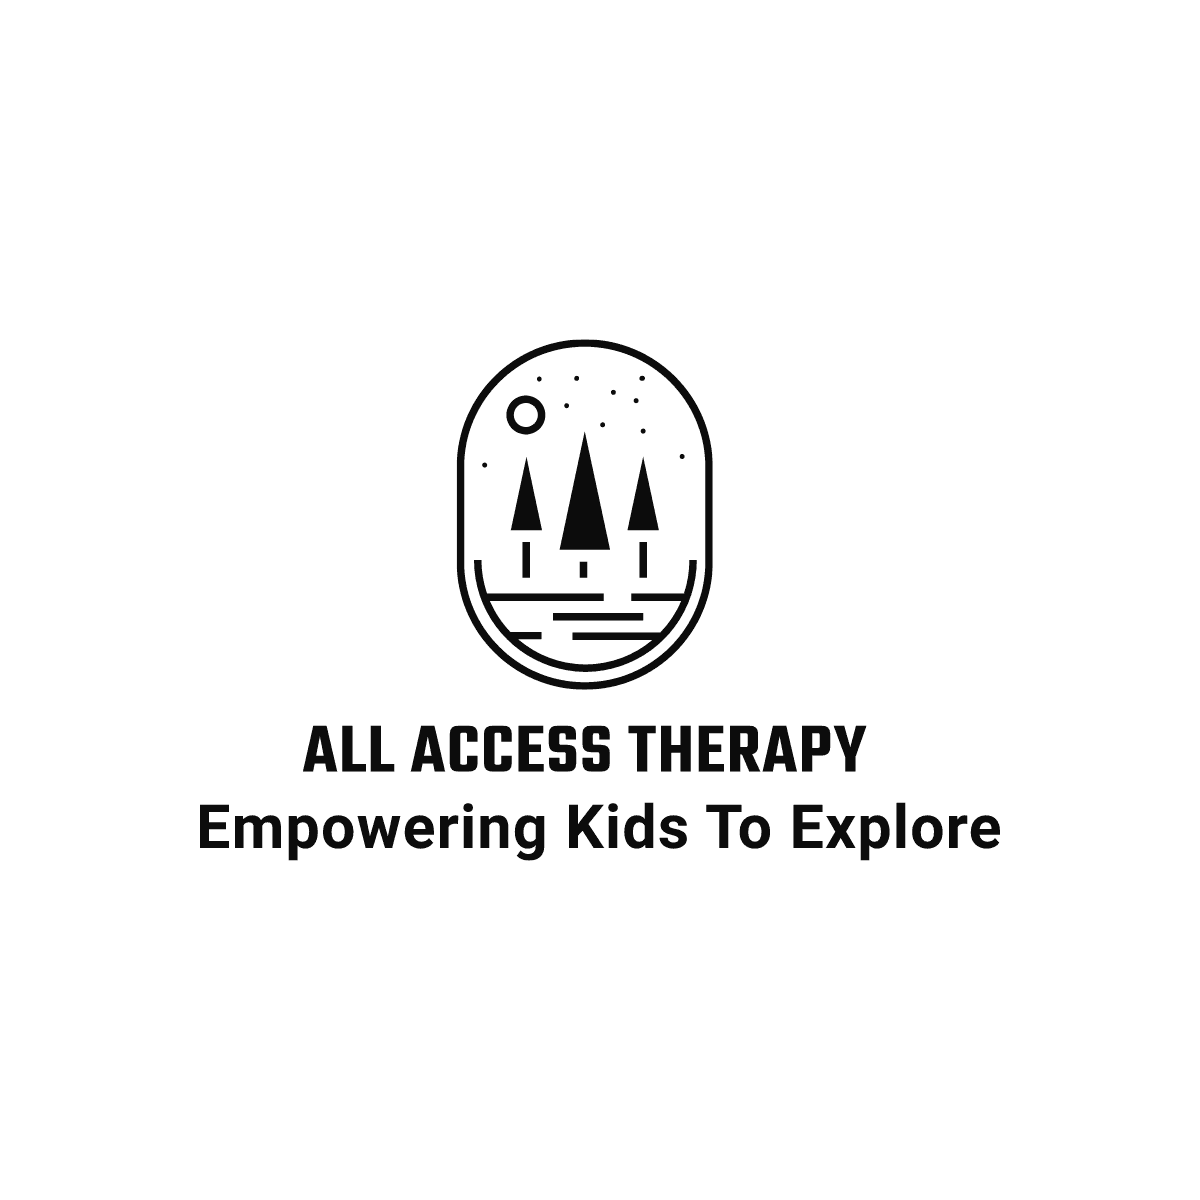 All Access Therapy